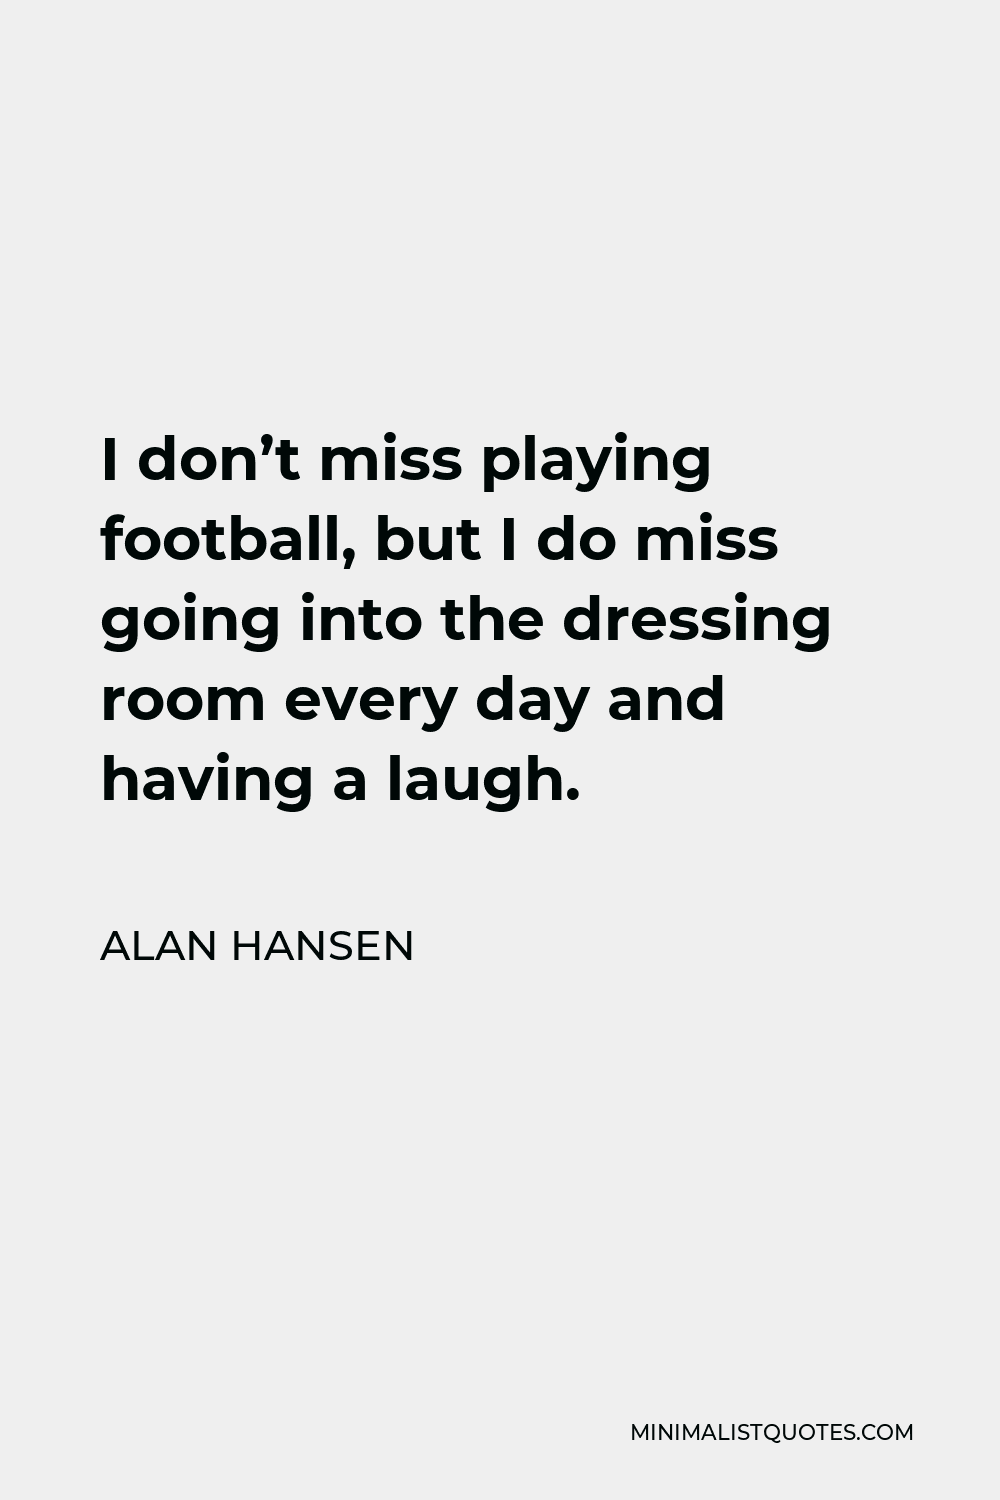 Alan Hansen Quote - I don’t miss playing football, but I do miss going into the dressing room every day and having a laugh.